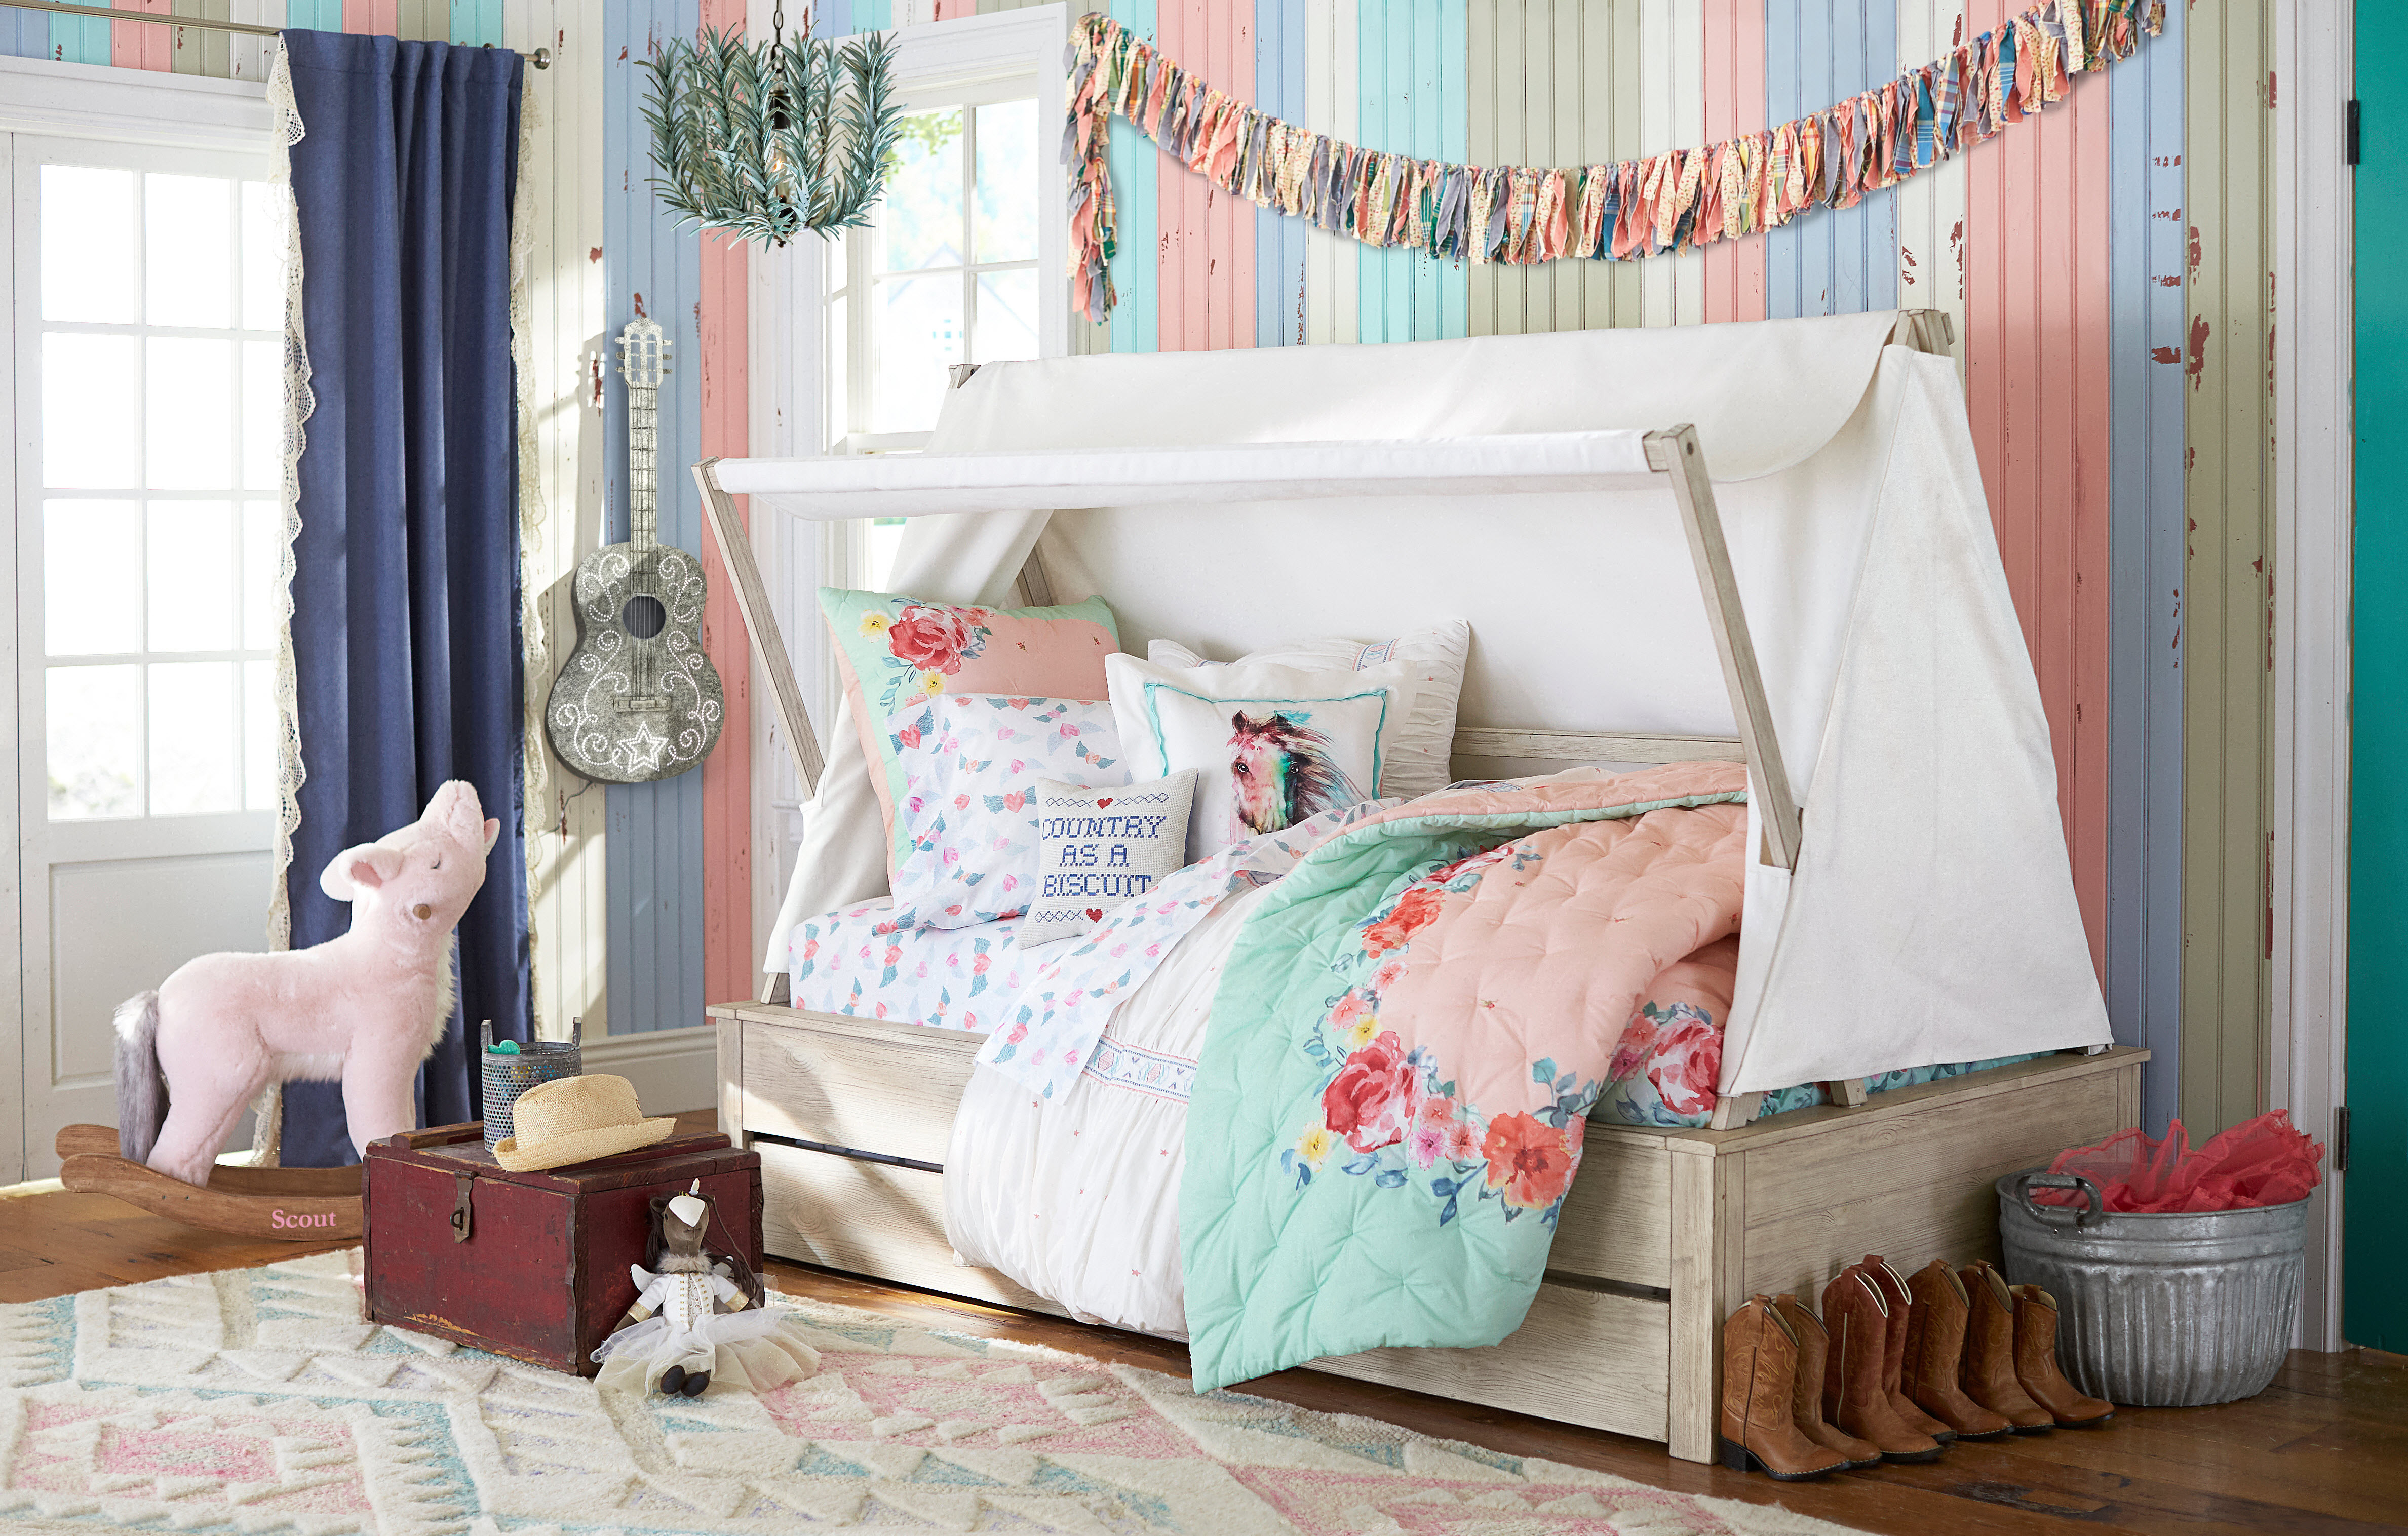 Pottery Barn Kids Launches Exclusive Collection With Texas Sisters Amie And Jolie Sikes Of Junk Gypsy Business Wire